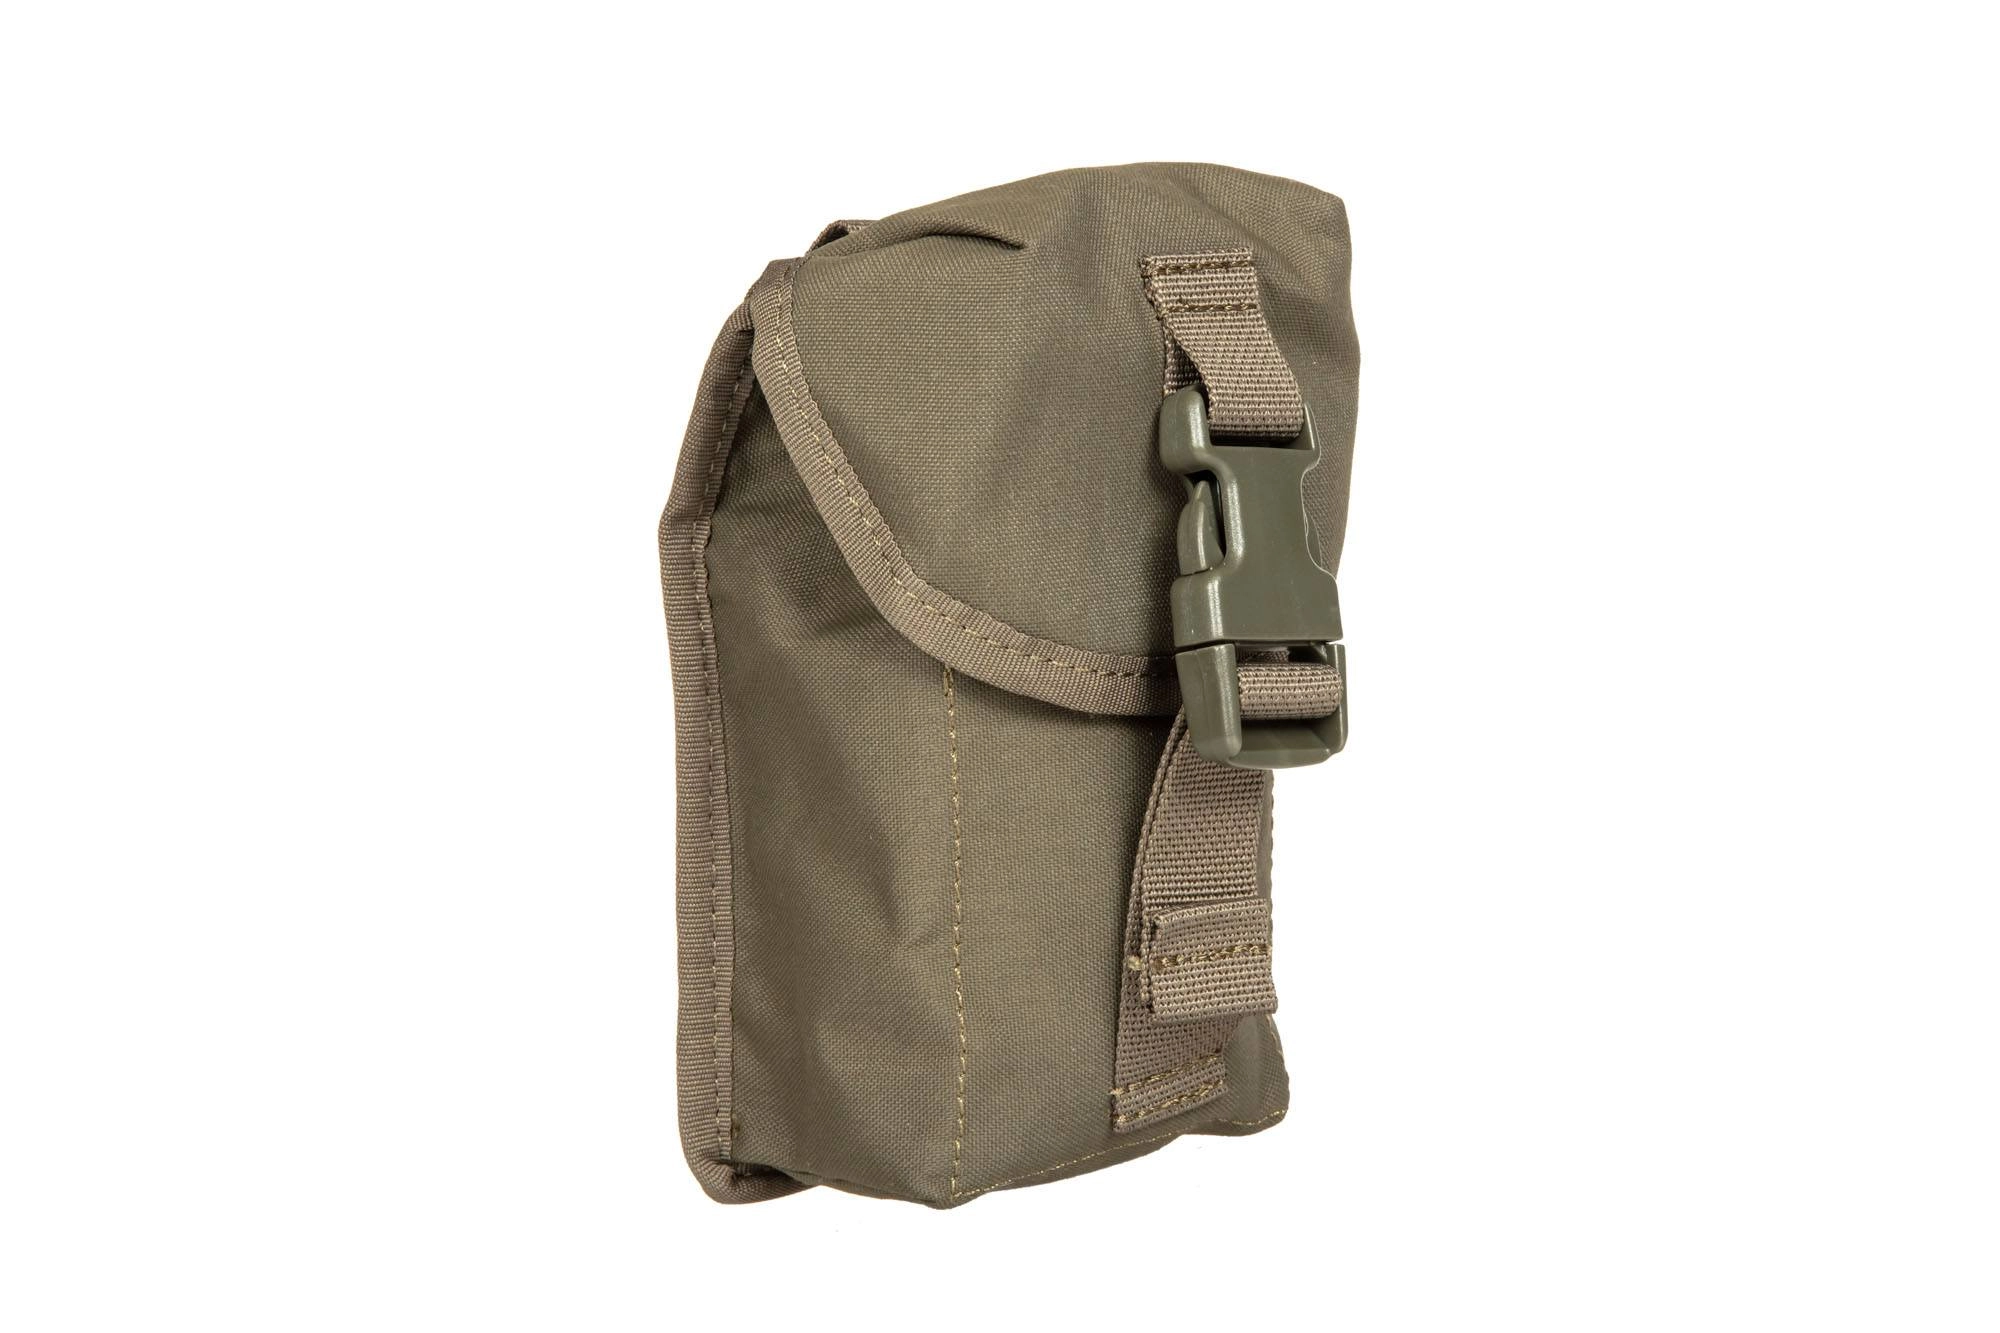 Large pouch All-Purpose Pidae - Olive